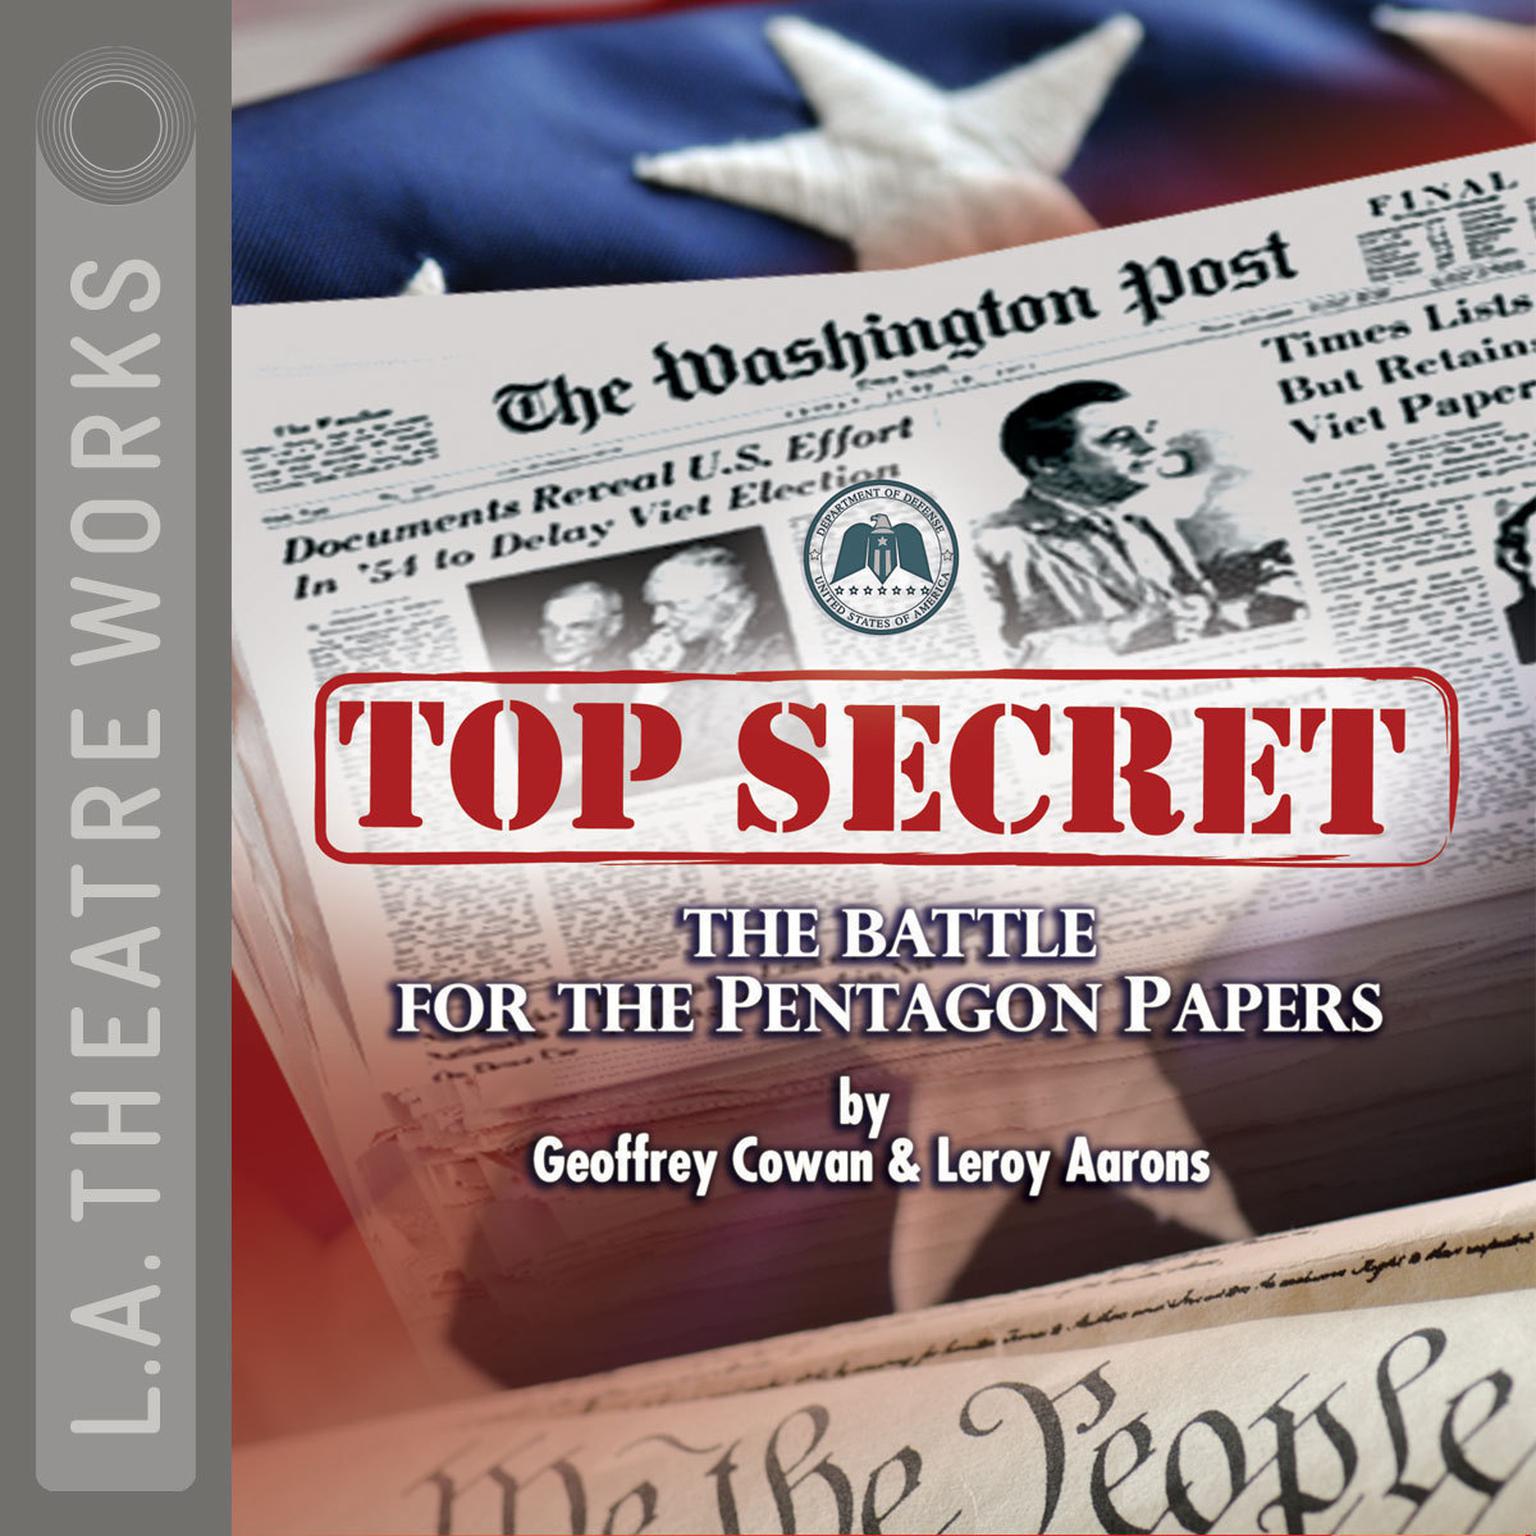 Top Secret: The Battle for the Pentagon Papers Audiobook, by Geoffrey Cowan